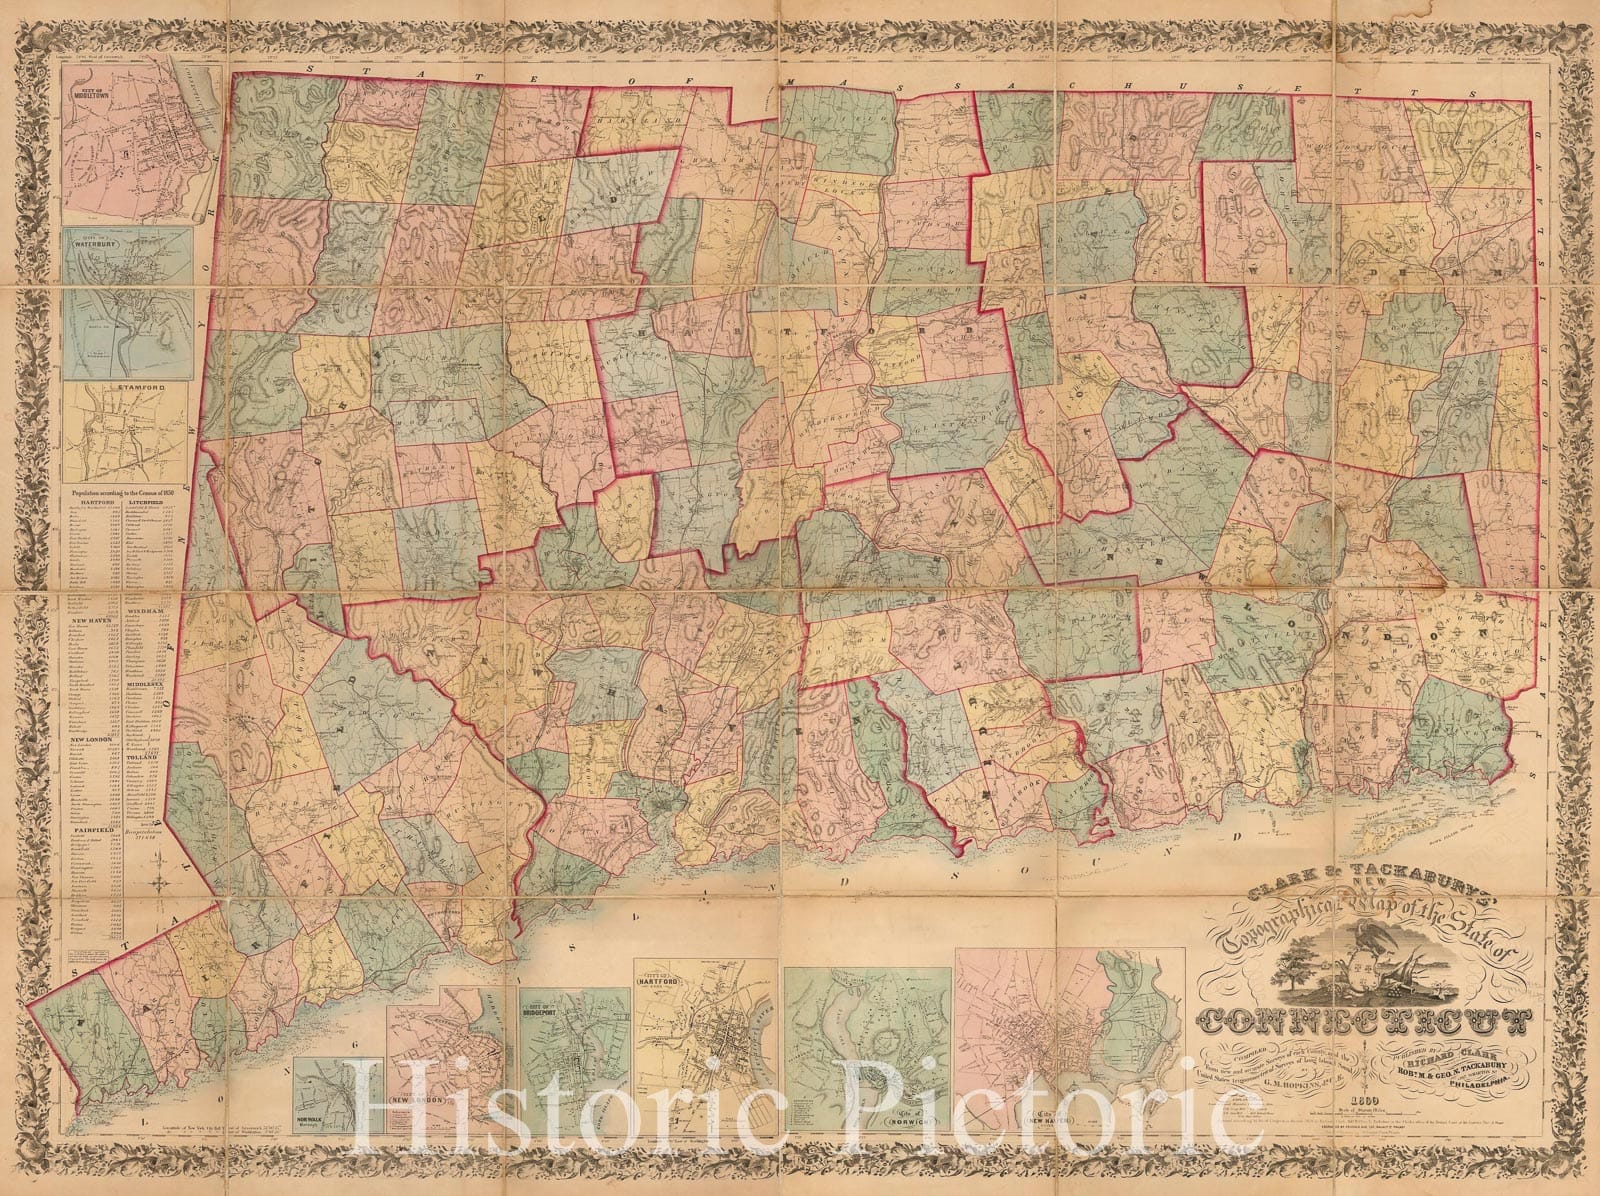 Historic Map - Clark & Tackaburys' New Topographical Map of the State of Connecticut, 1860, Robert Tackabury - Vintage Wall Art